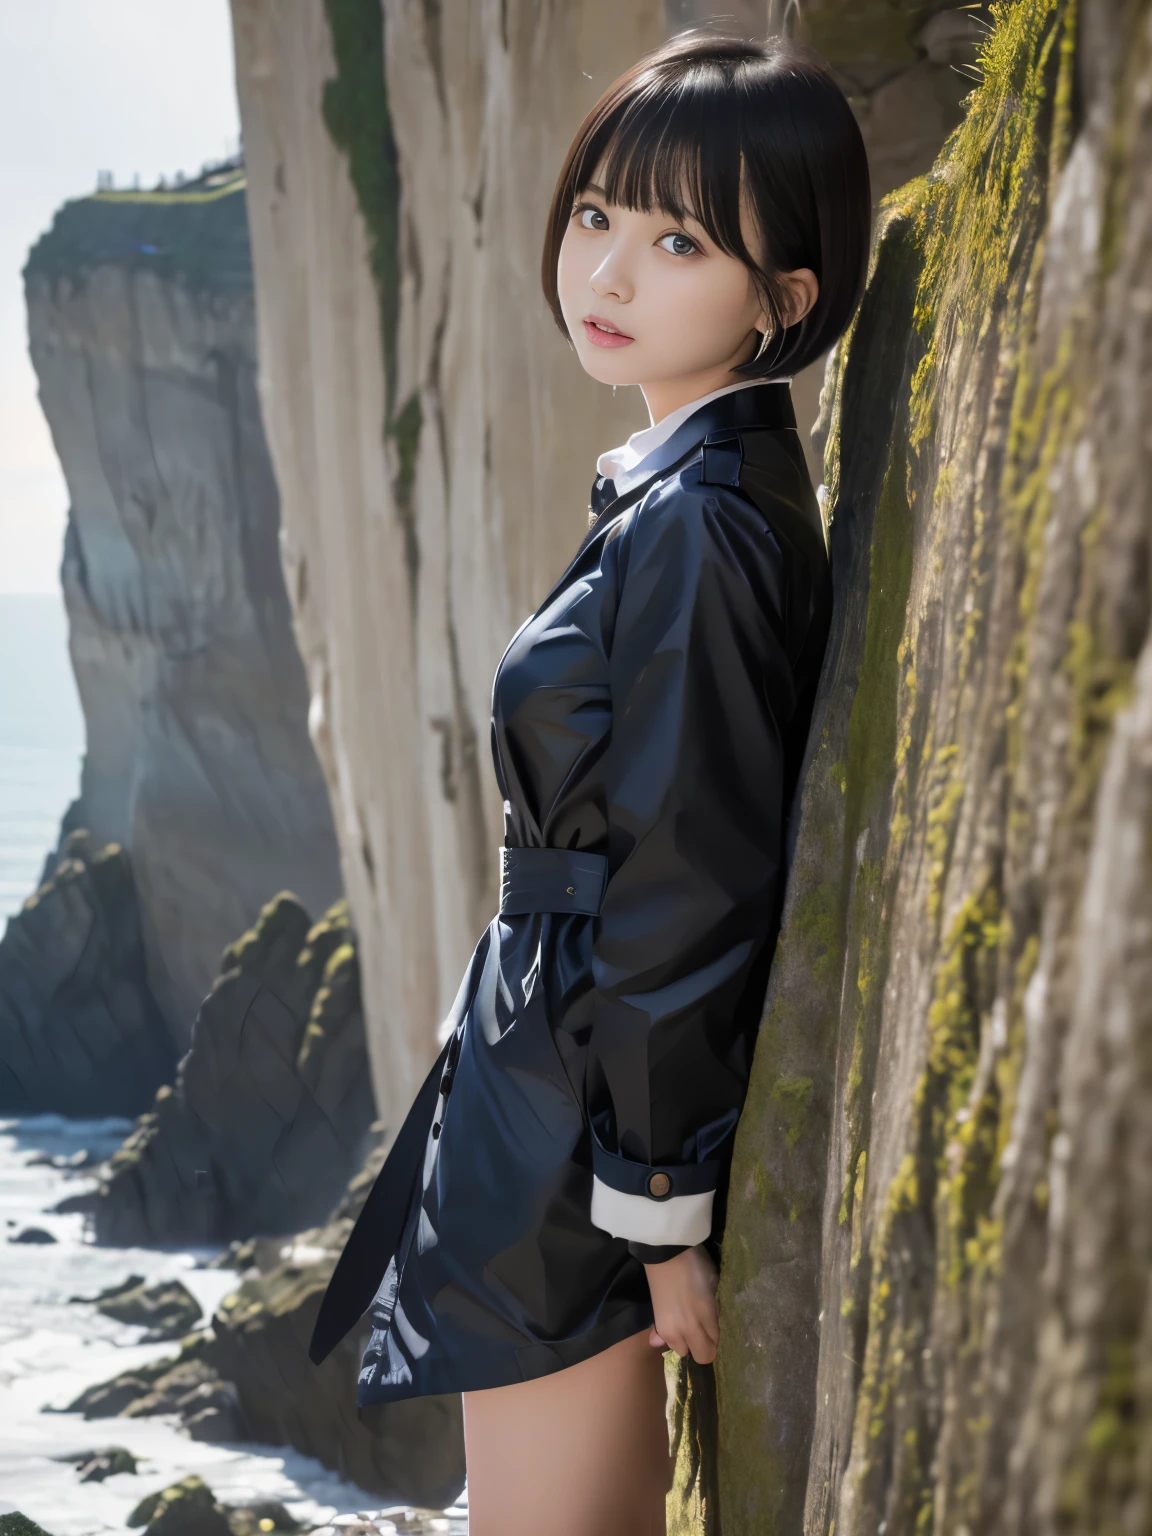 (Masterpiece, Best-quality, RAW-photo, Super-high-quality, Highest-quality, Photorealistic, 8K photo, NSFW), 
(anatomically correct, accurate human body, realistic person)
(Thin waist and busty style body, 16-years-old, Realistic Japanese girl, short height, Kawaii Japanese, angelic beauty), 
(knee length trench coat, turn up the collar, close all buttons), 
(full length, whole body, standing, See photographer, look at viewer, turn the body forward, Very cold, It's freezing), 
(maiko, angelic beauty, Round face, Black hair, Black eyes, Moist eyes, Shining eyes, Short bob cut, Bangs, Down-slating eyebrows, one little earring), 
(angry look, open your mouth wide, shout at the camera), 
(sheer cliff, Cliff in midwinter, strong wind is blowing)
bright lighting